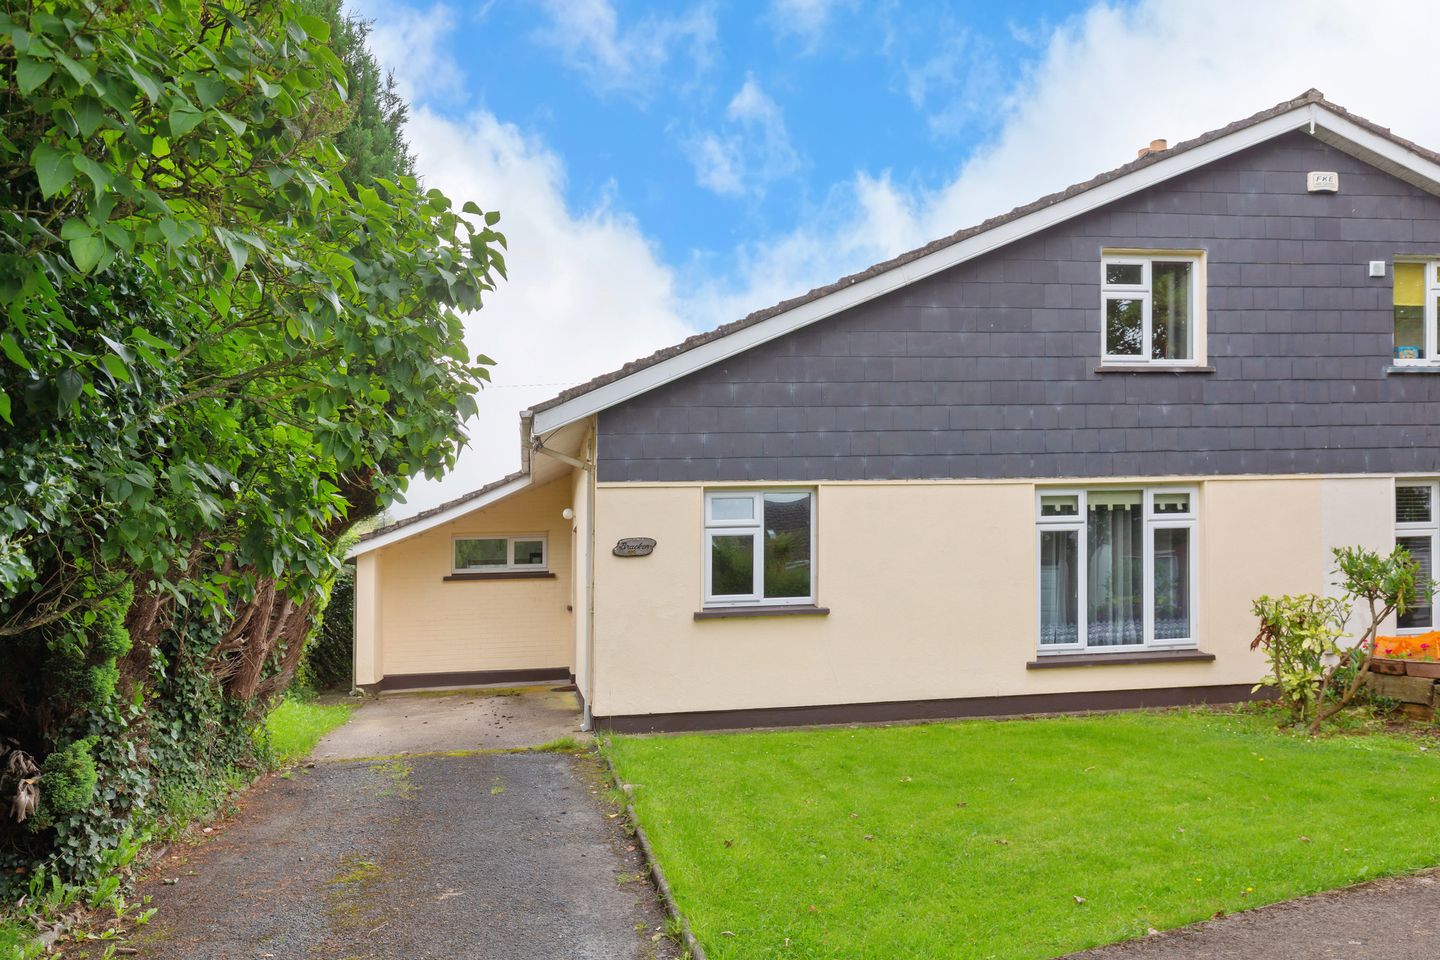 72 Caragh Court, Naas, Co. Kildare, W91V6PV